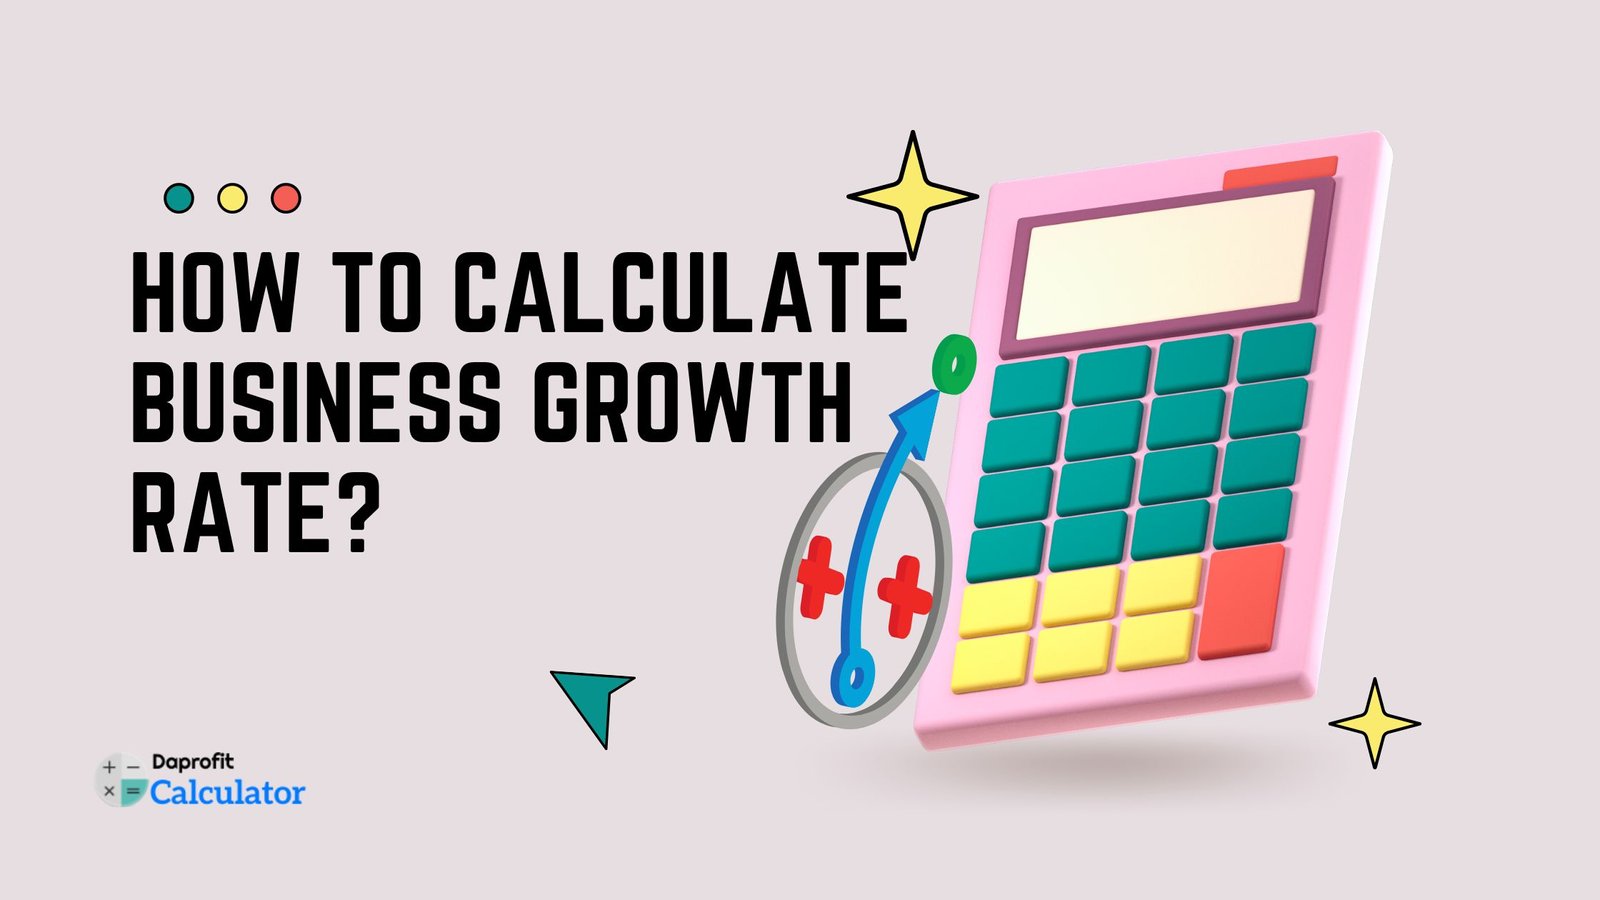 How to Calculate Business Growth Rate? image